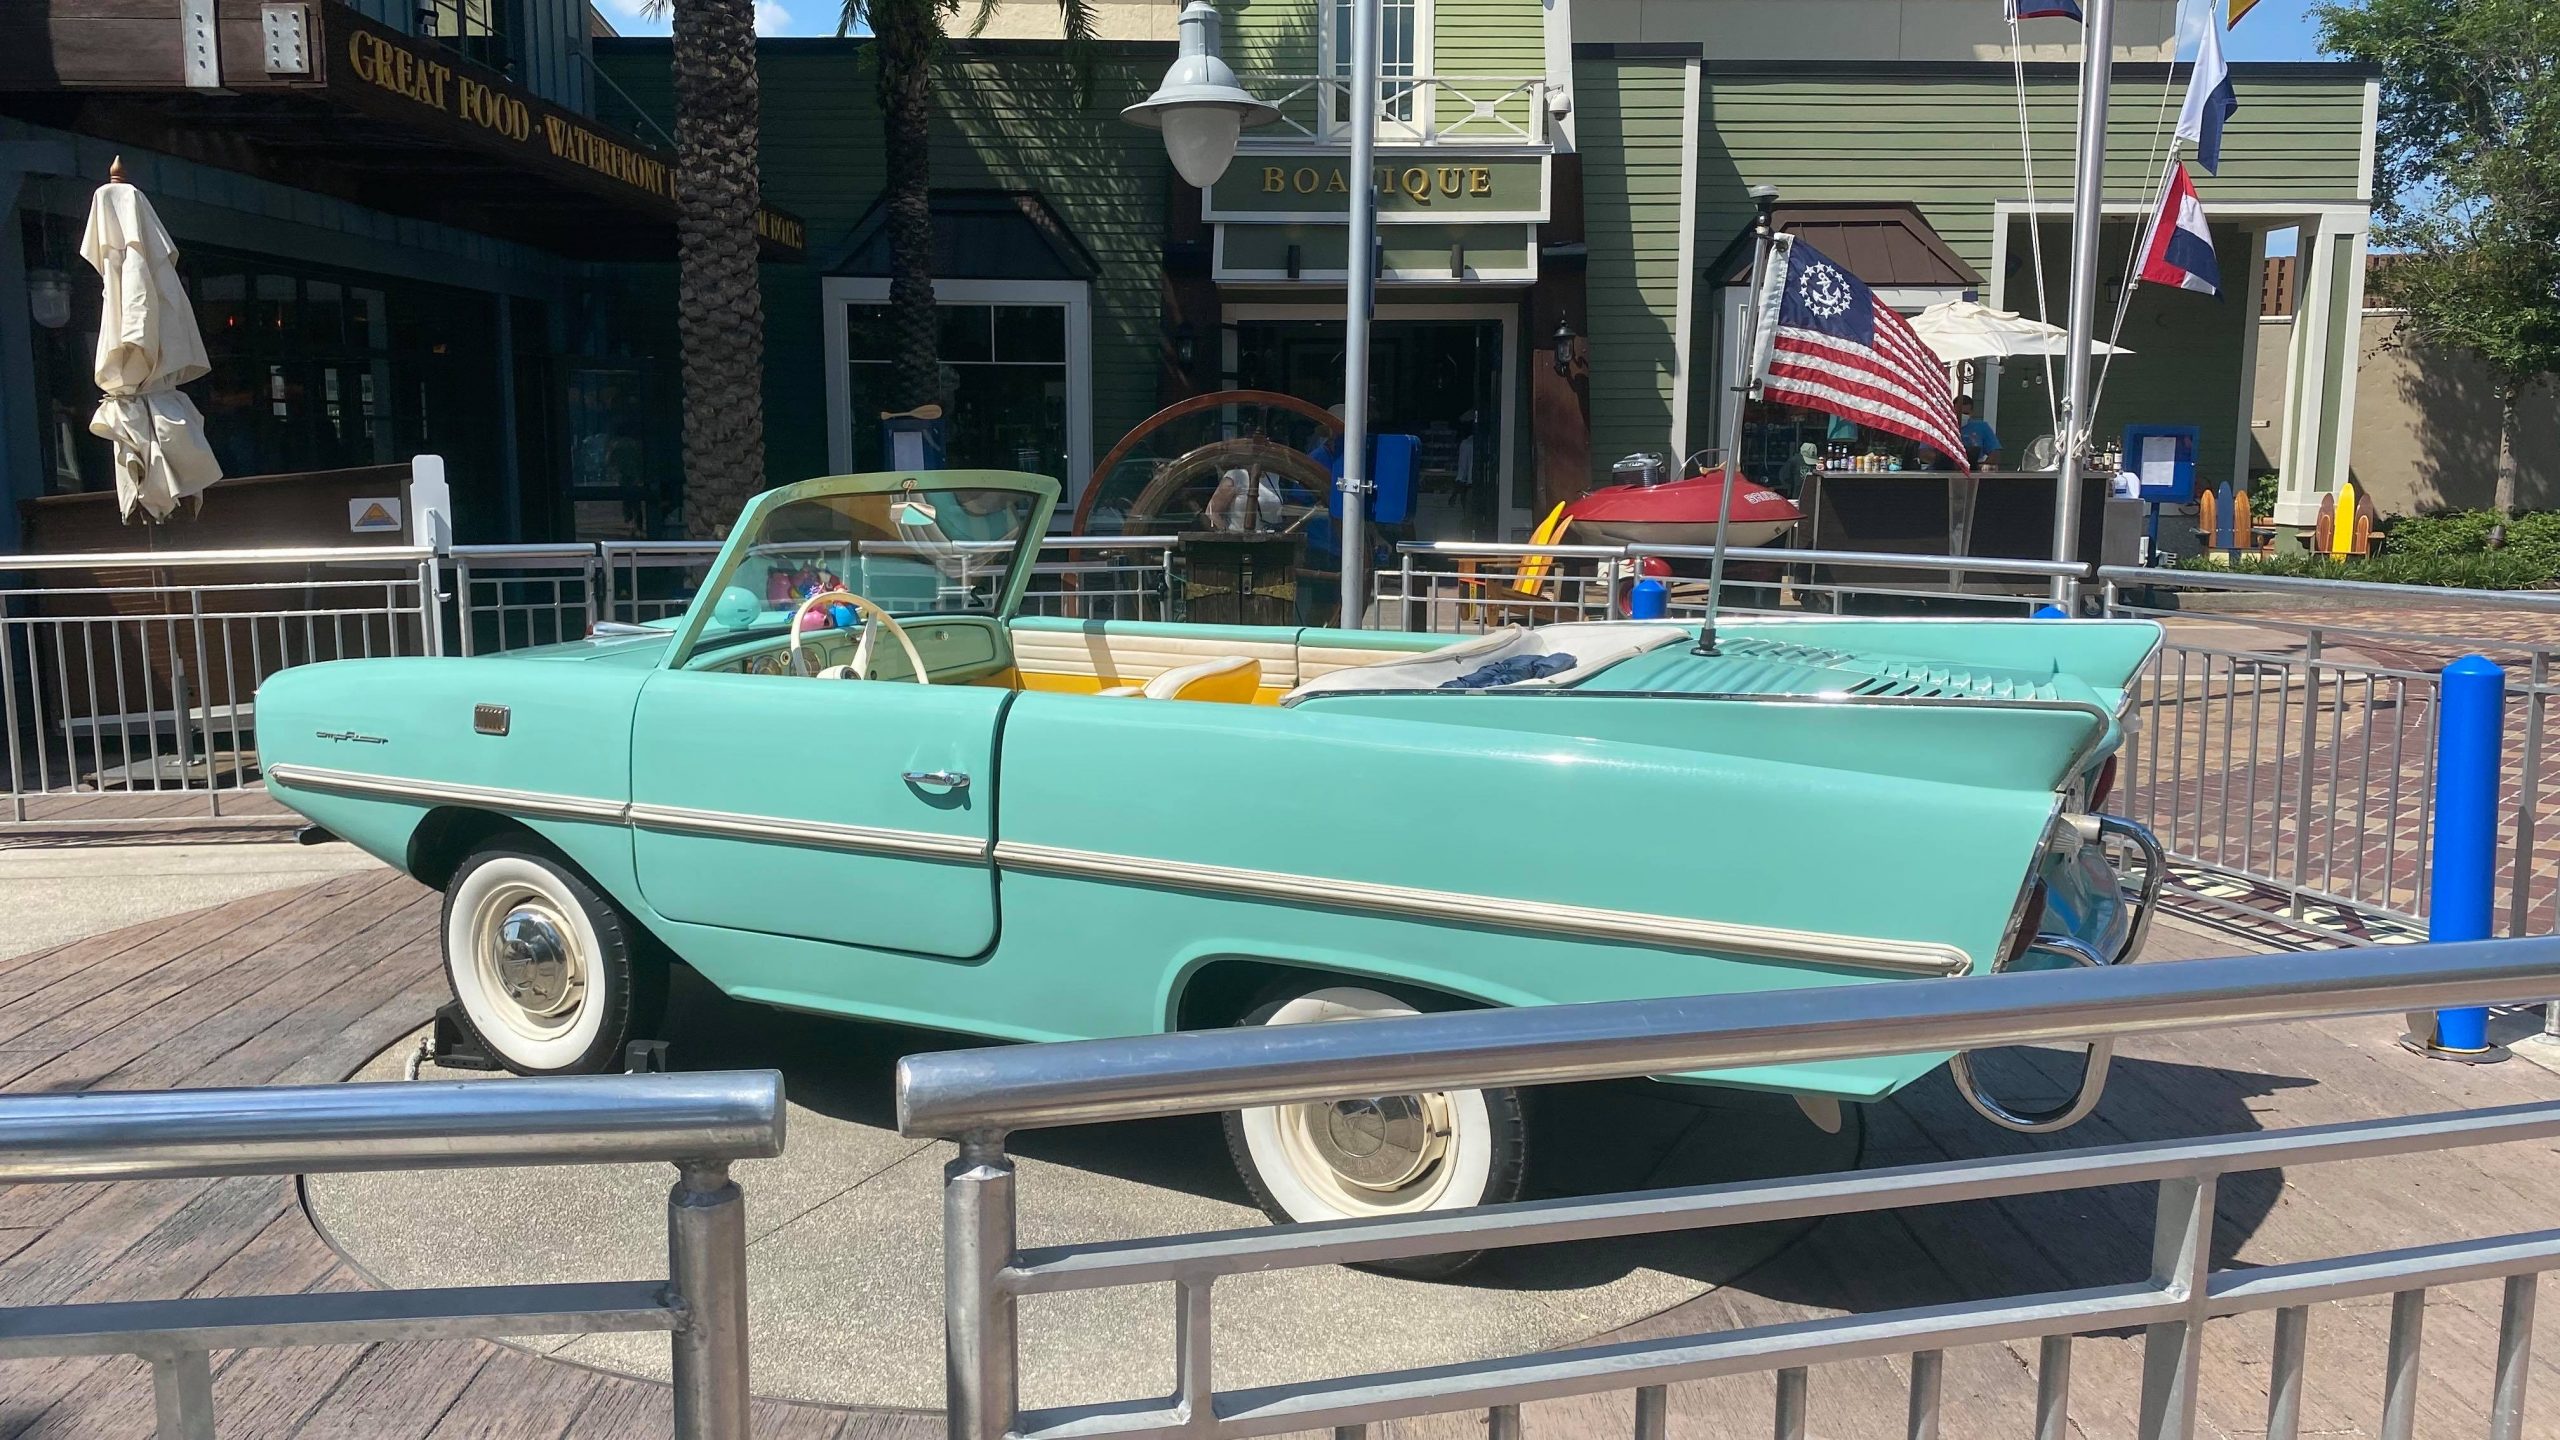 Vintage Amphicar are operating again at Disney Springs